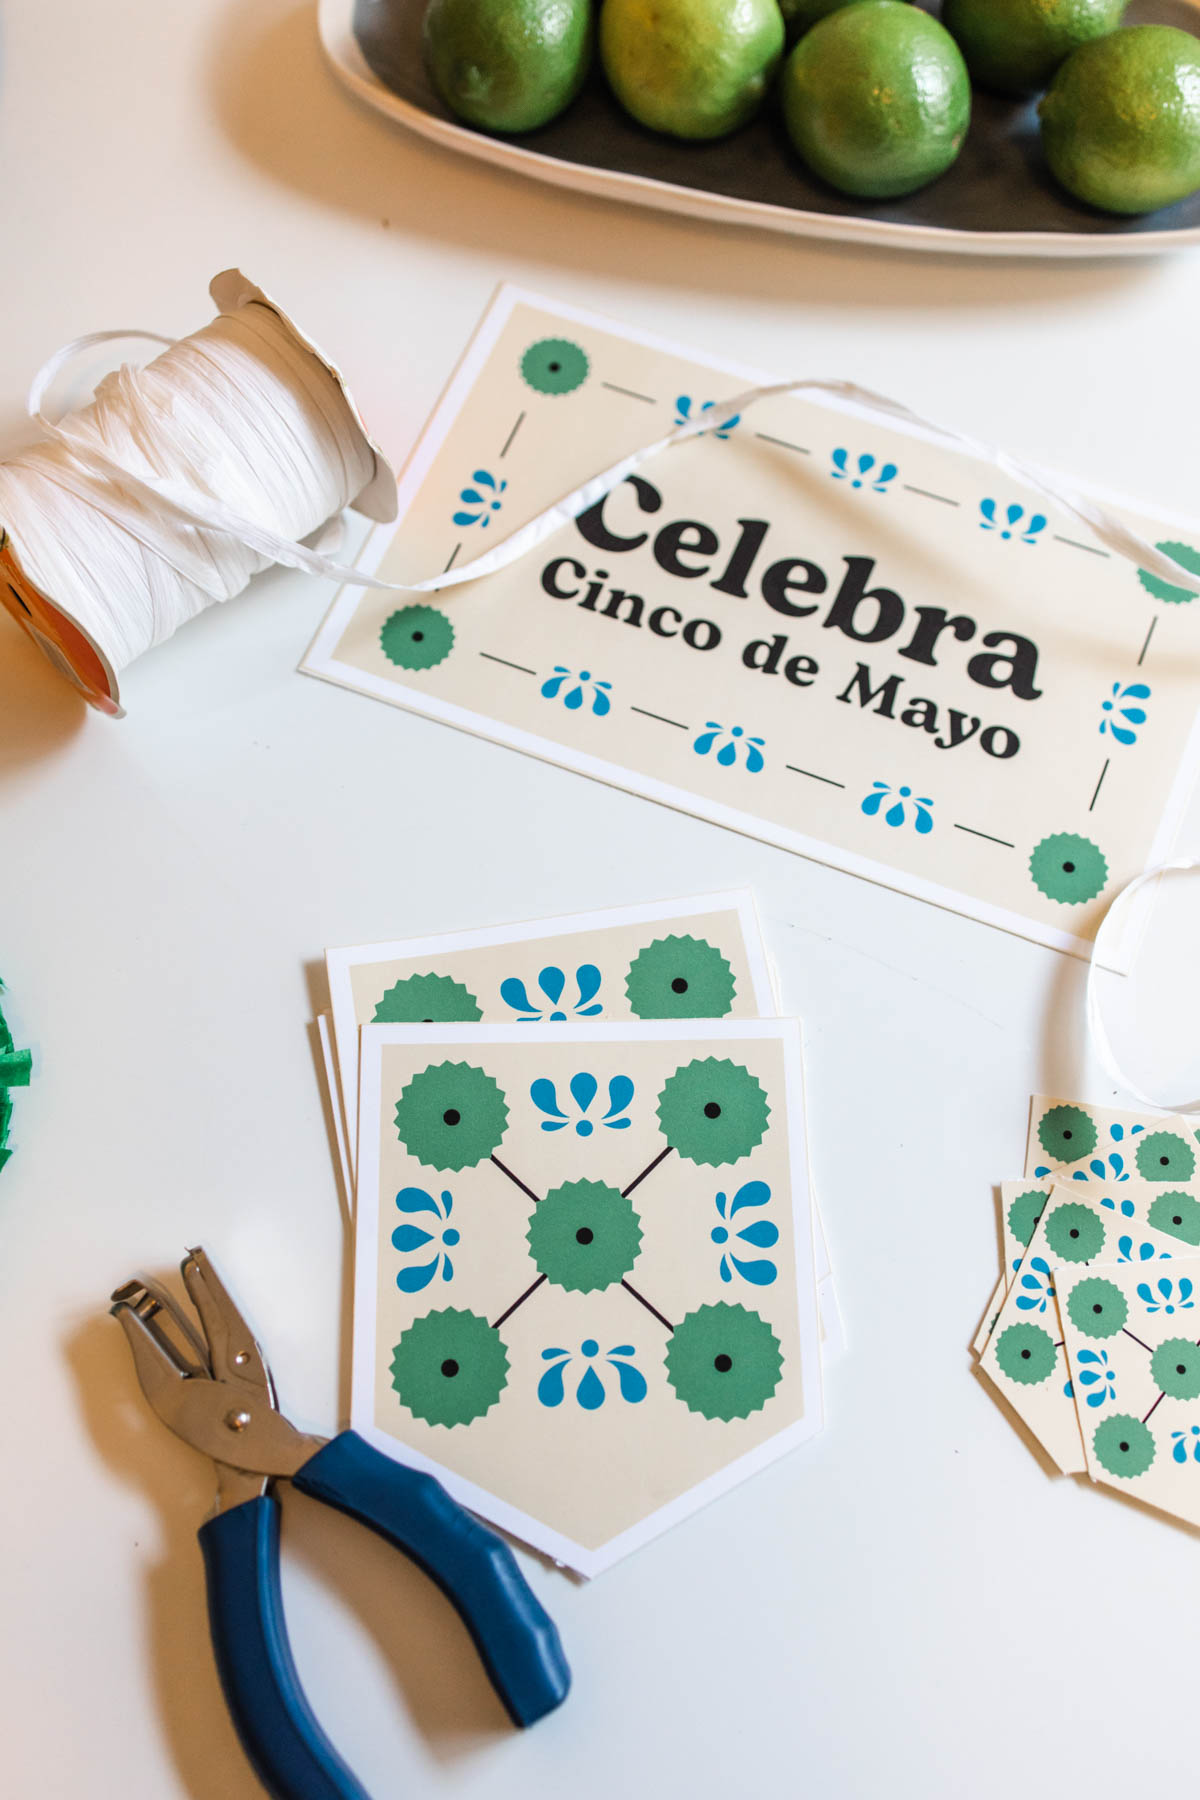 Printable party kit for Cinco de Mayo on a table next to a hole punch and white ribbon.